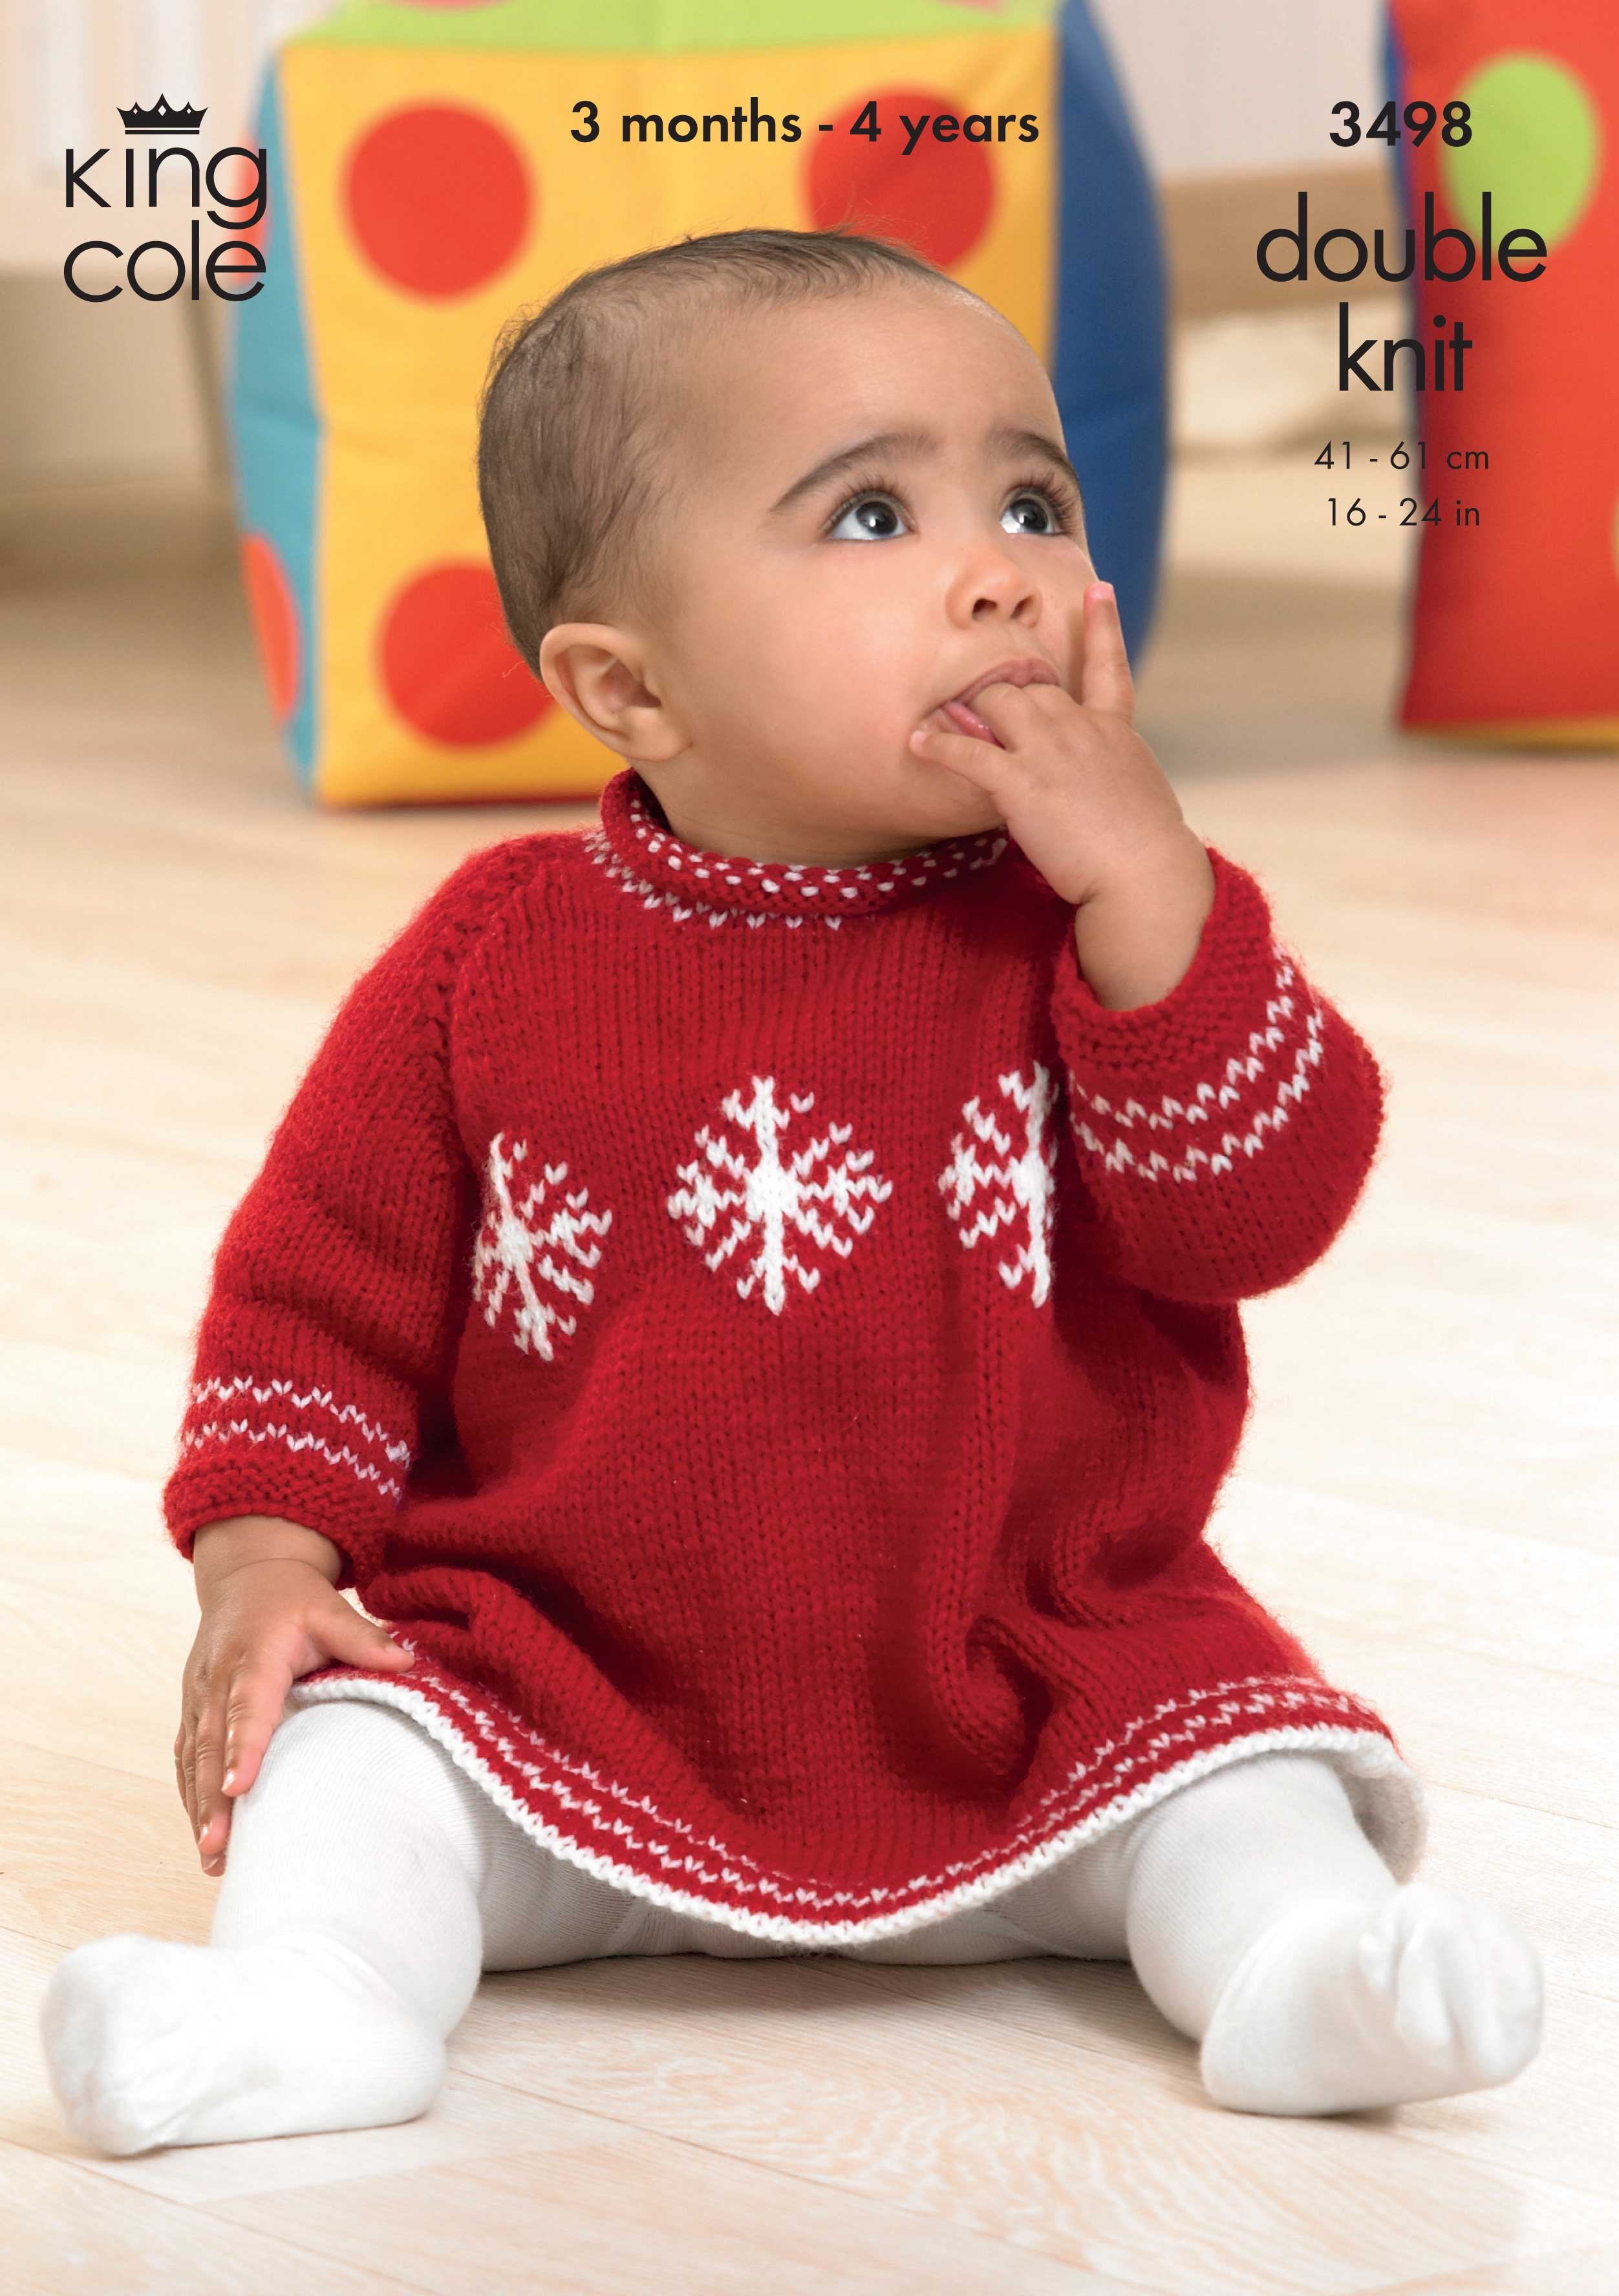 Double Knitting Baby Patterns Easy To Follow Christmas Sweater And Dress Knitted In Comfort Dk